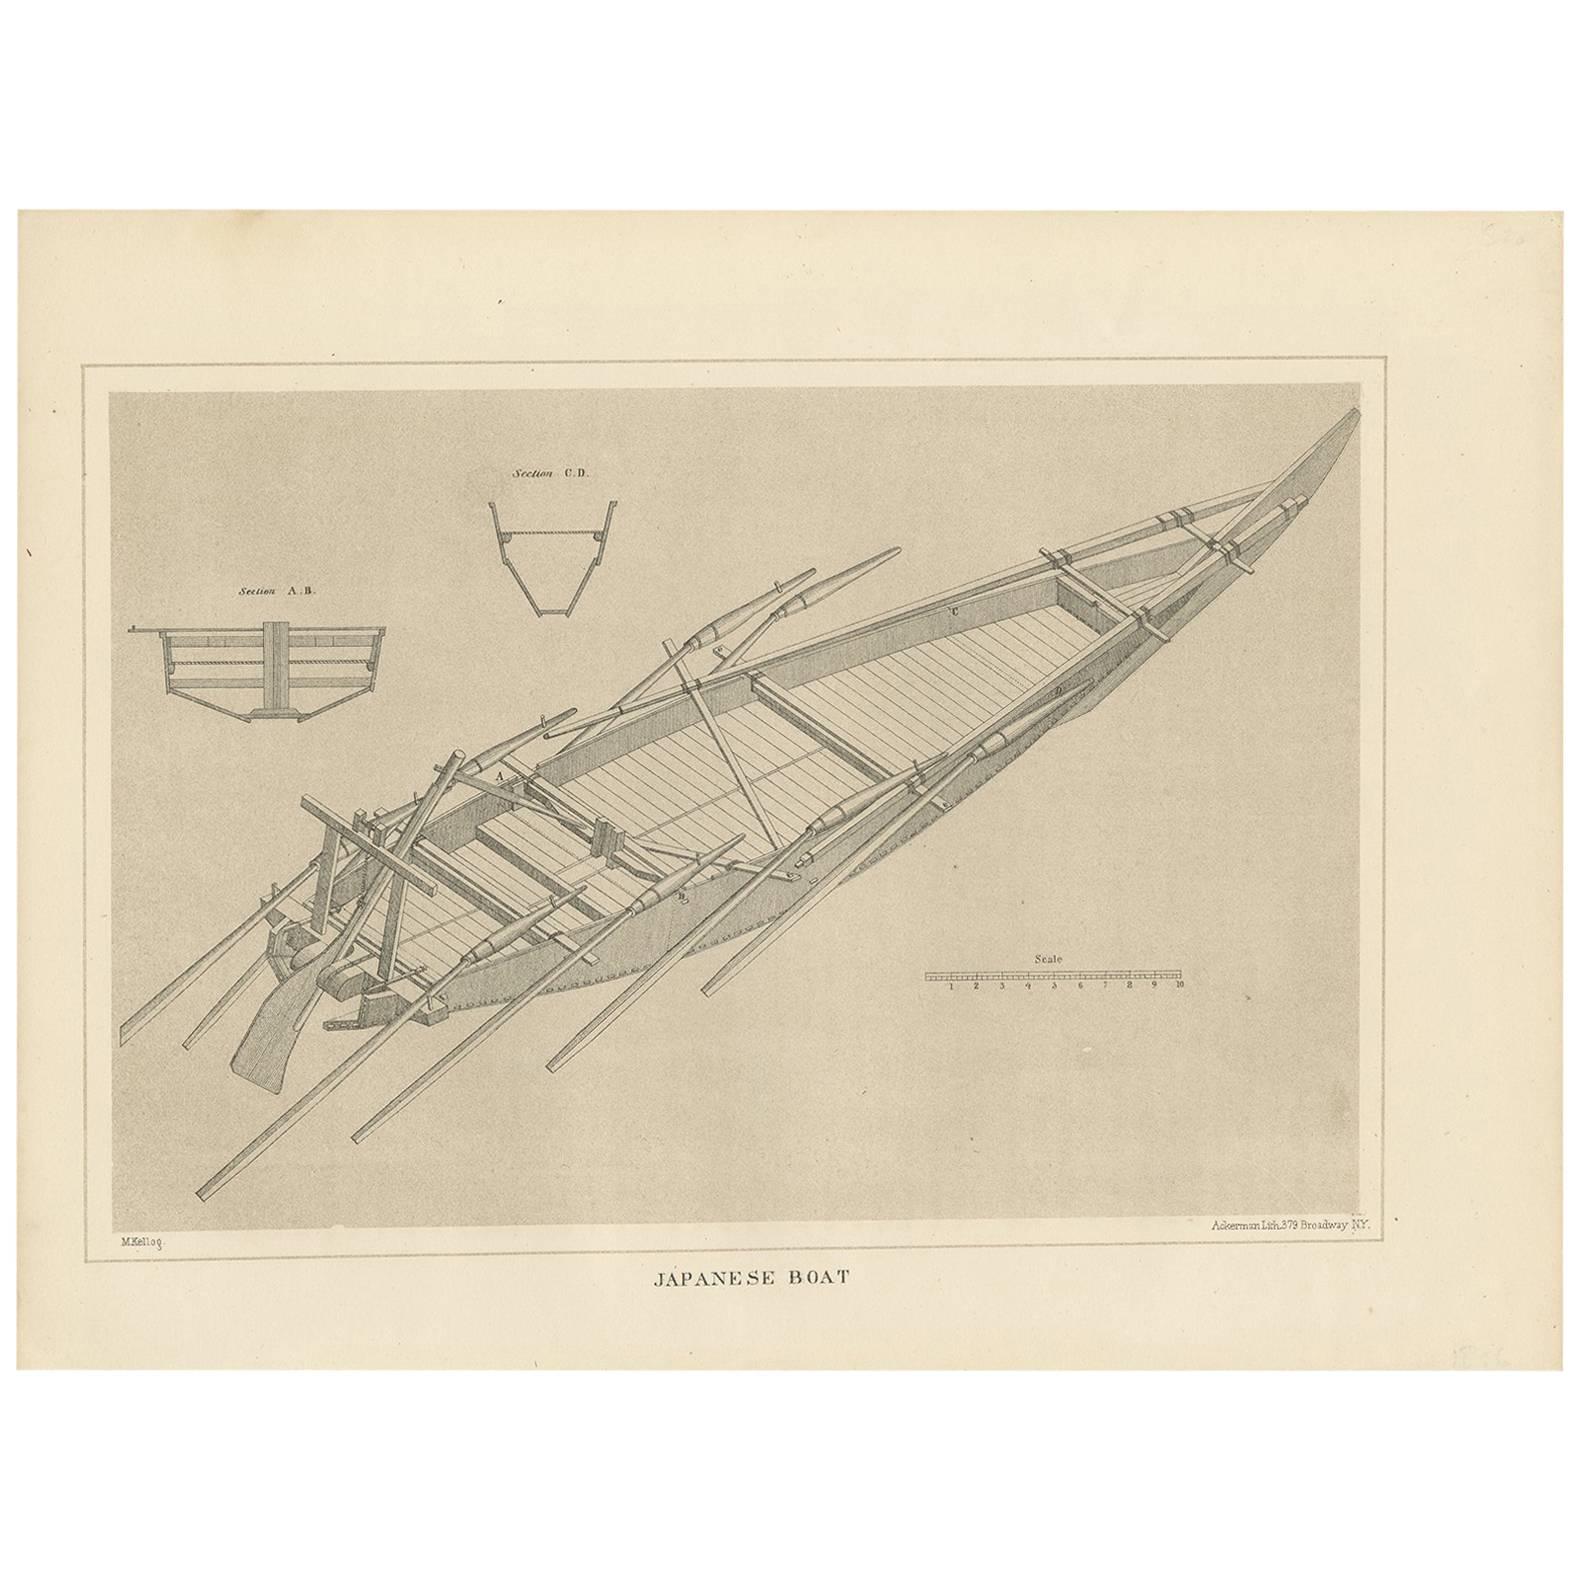 Antique Print of a Japanese Wooden Boat by Ackerman, 1856